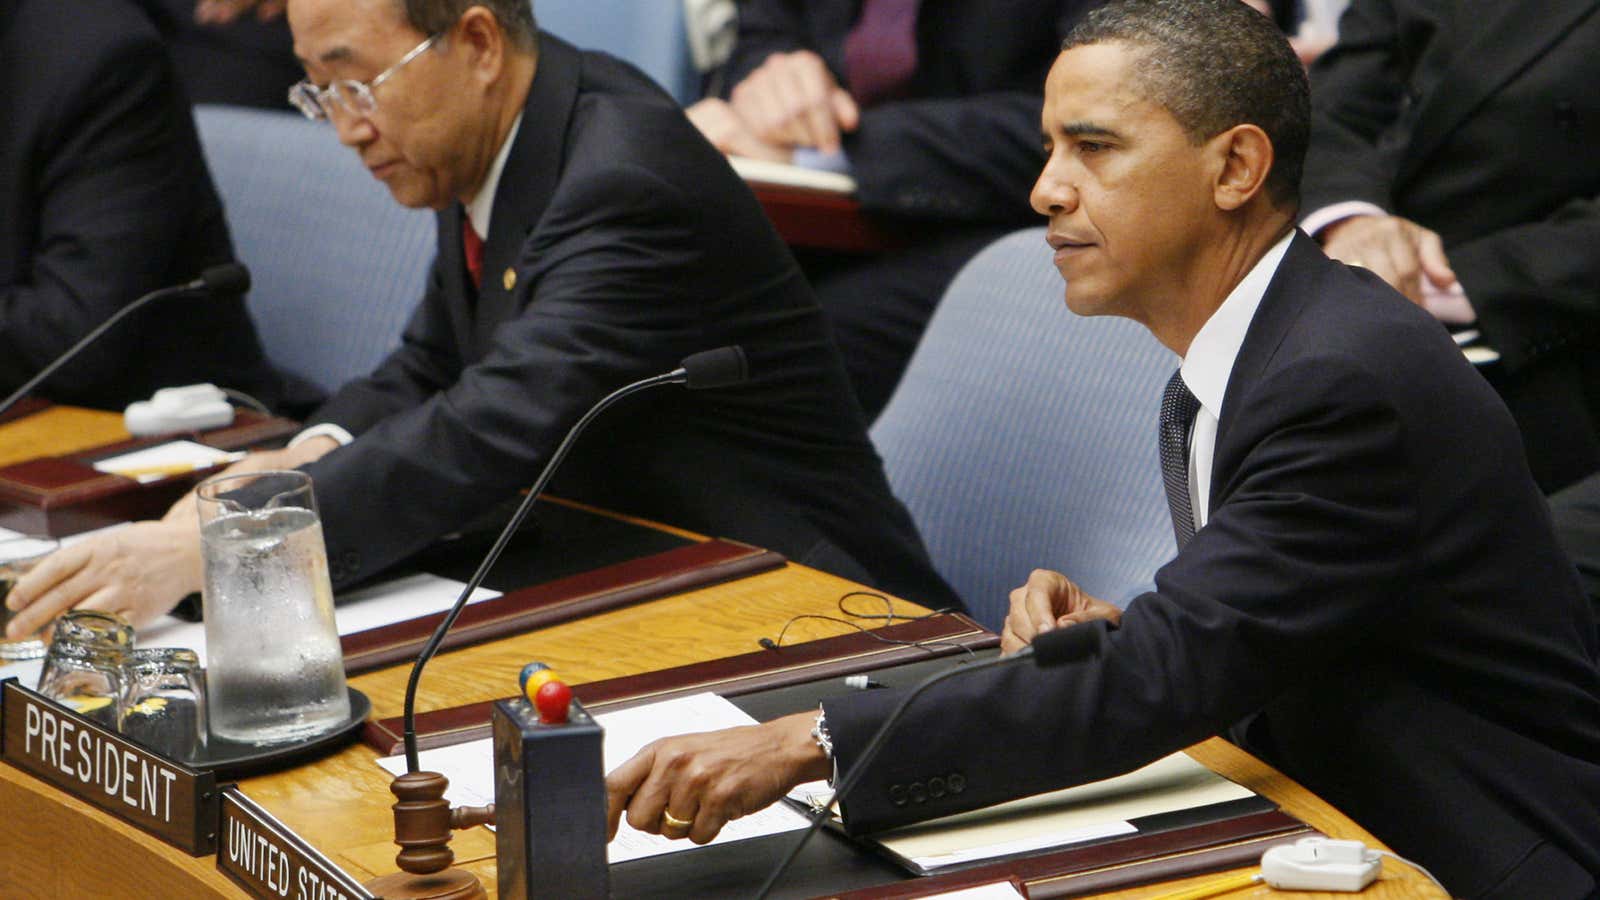 A Chinese company is suing Barack Obama, upending the rules of foreign investment.